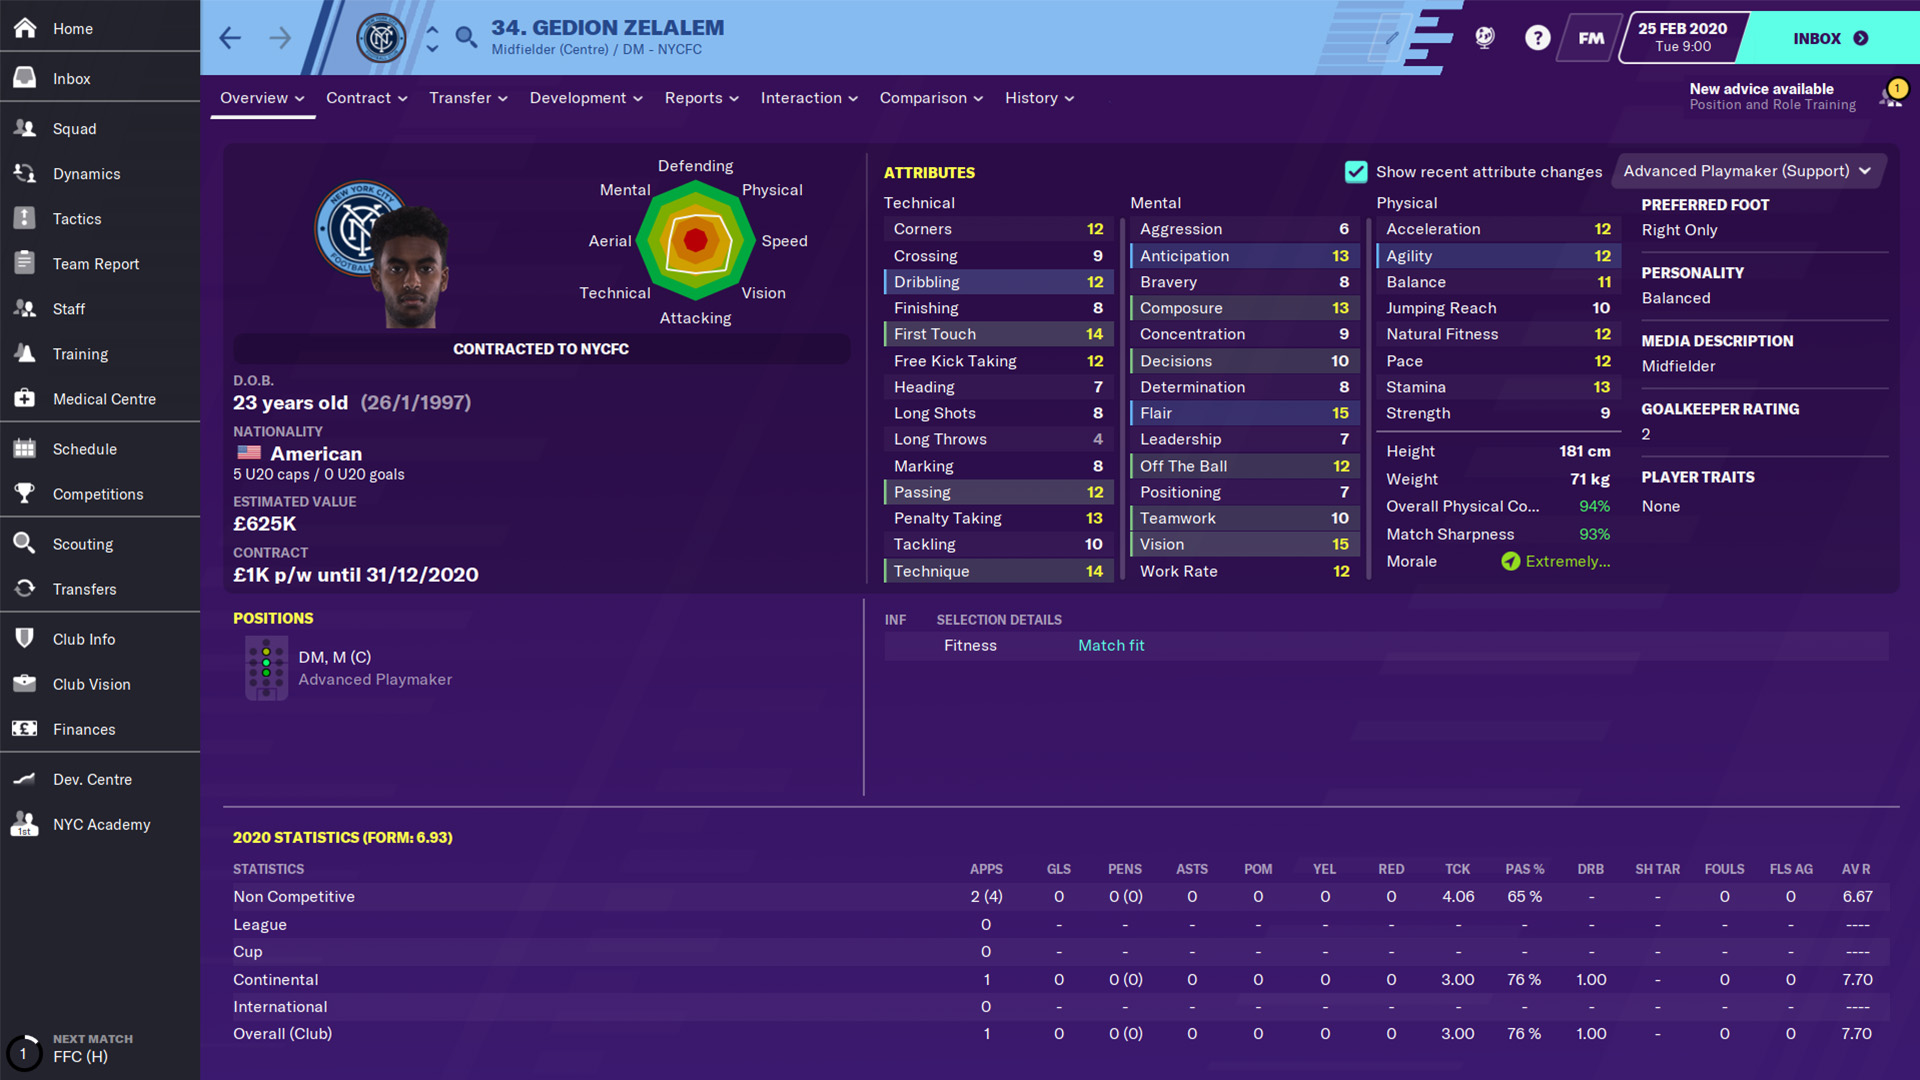 A screenshot of Gedion Zelalem's profile in Football Manager 2020